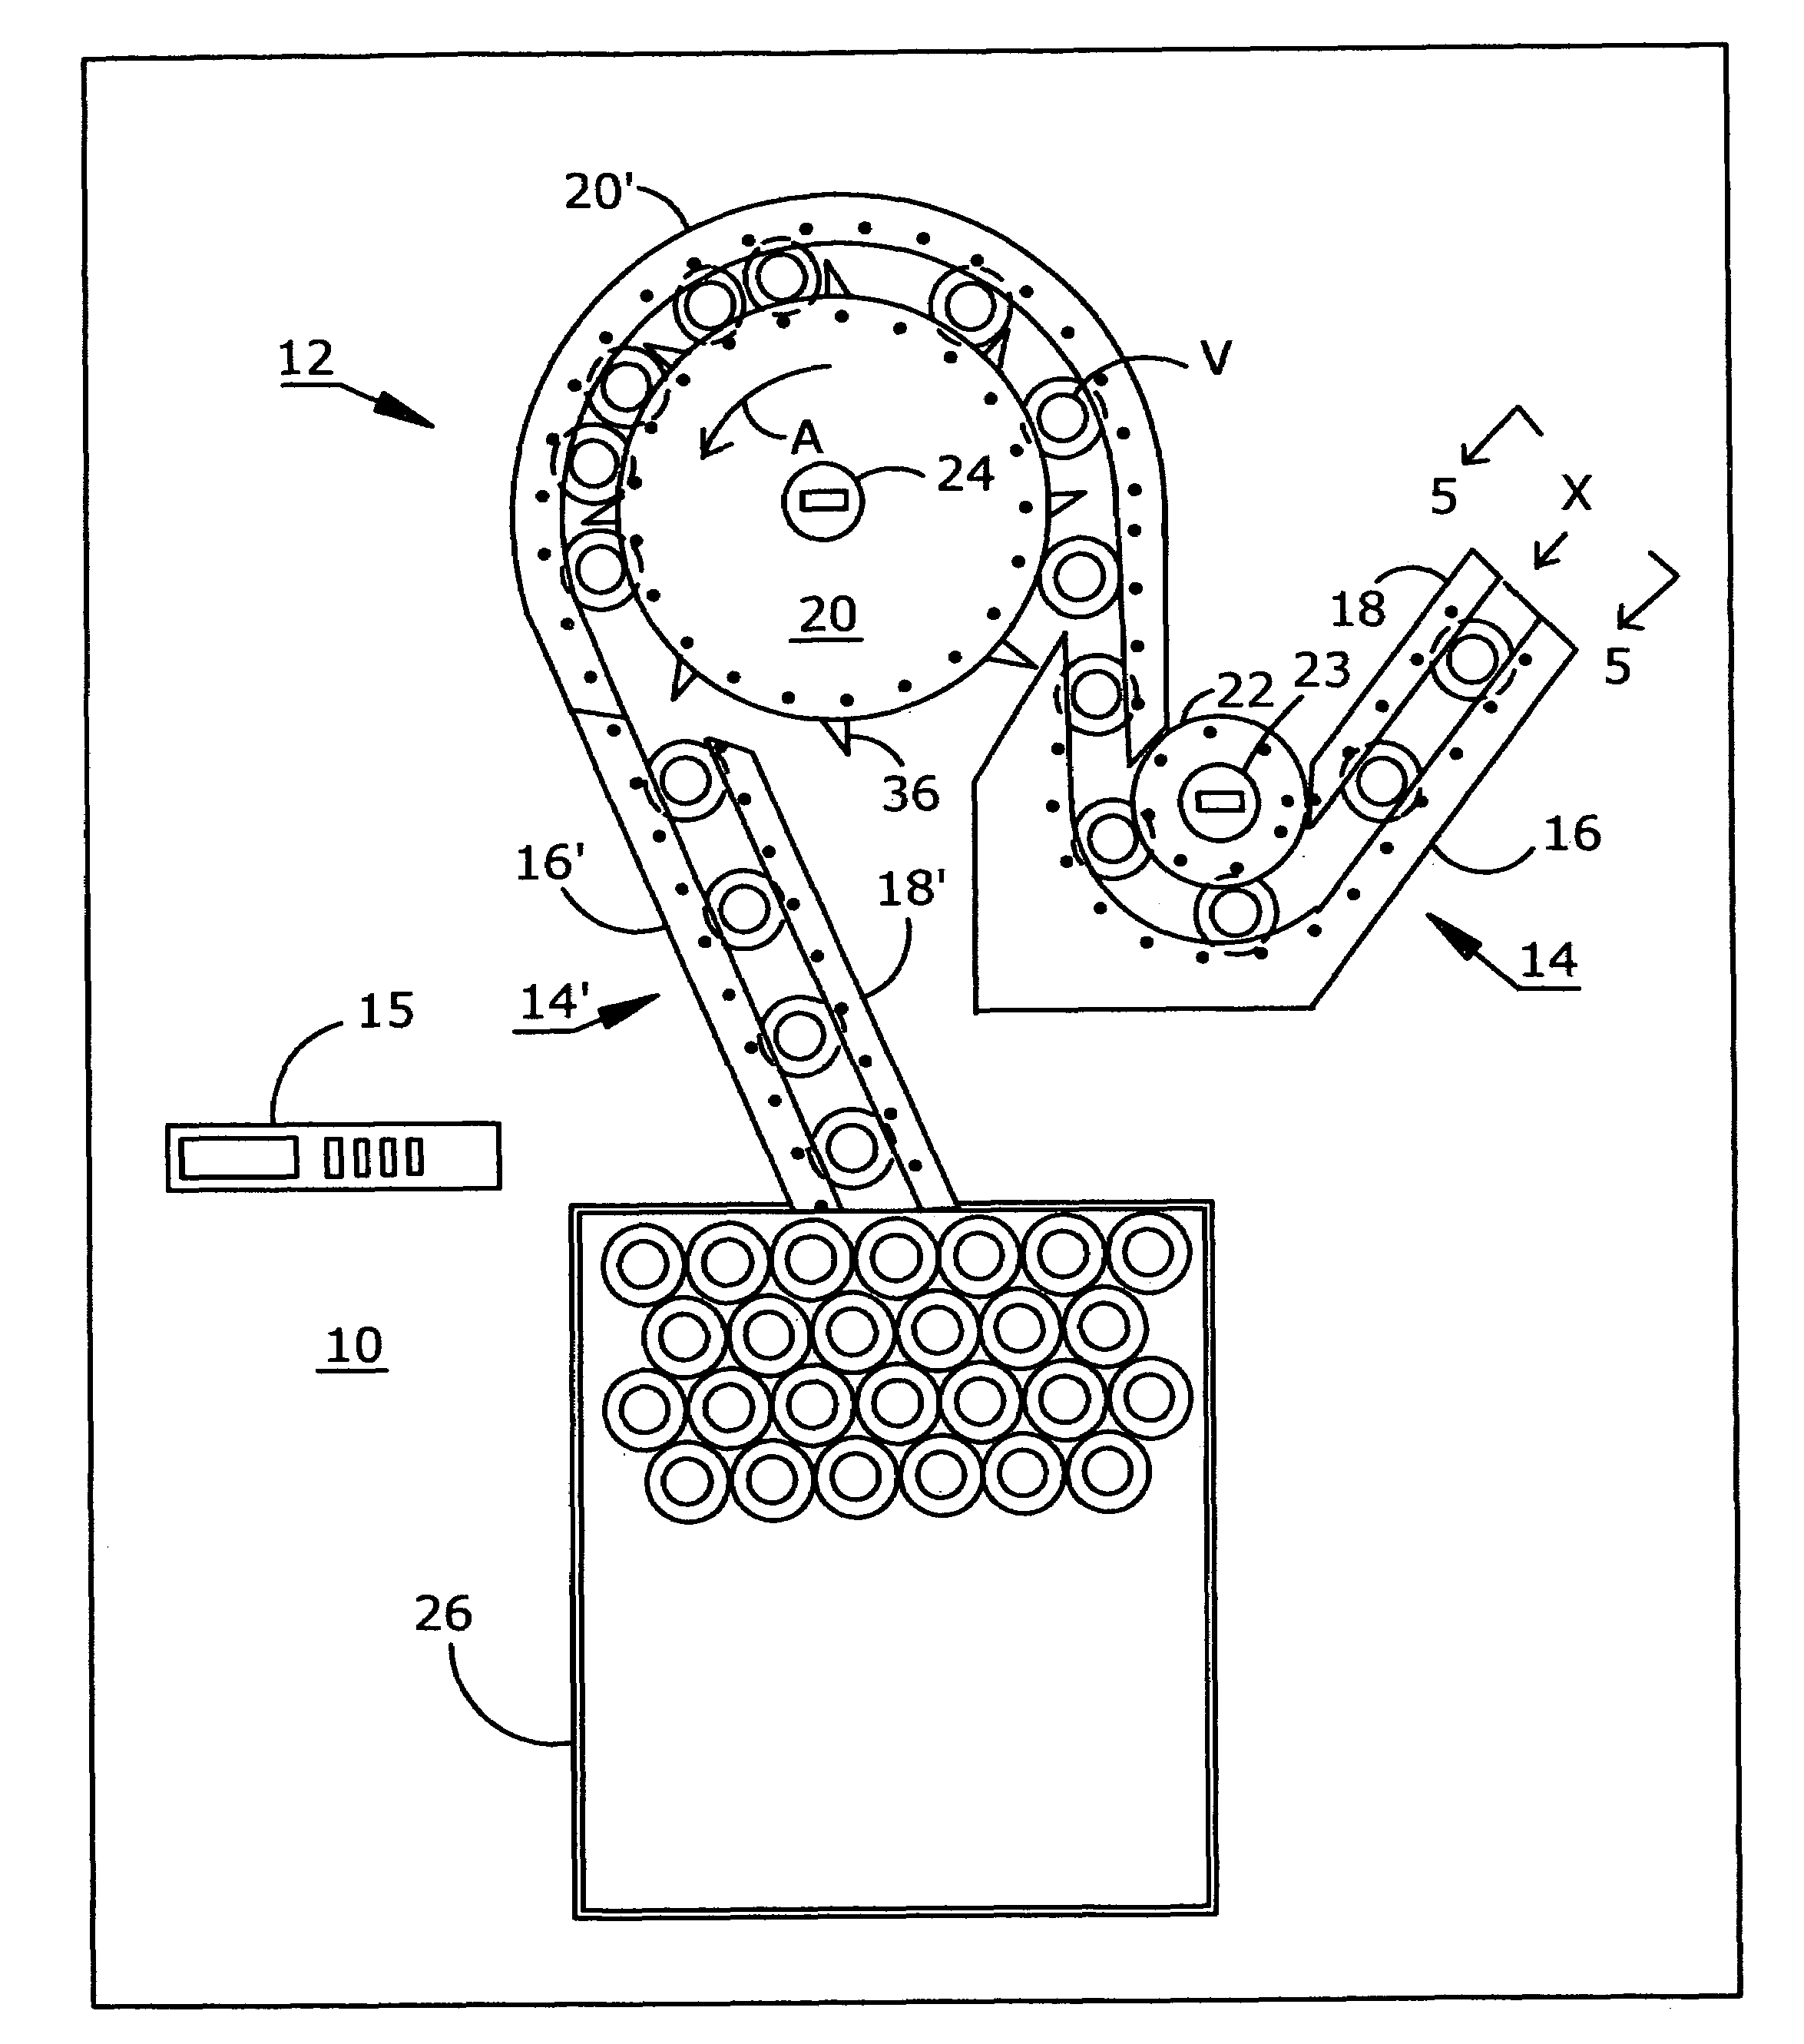 Apparatus for loading trays